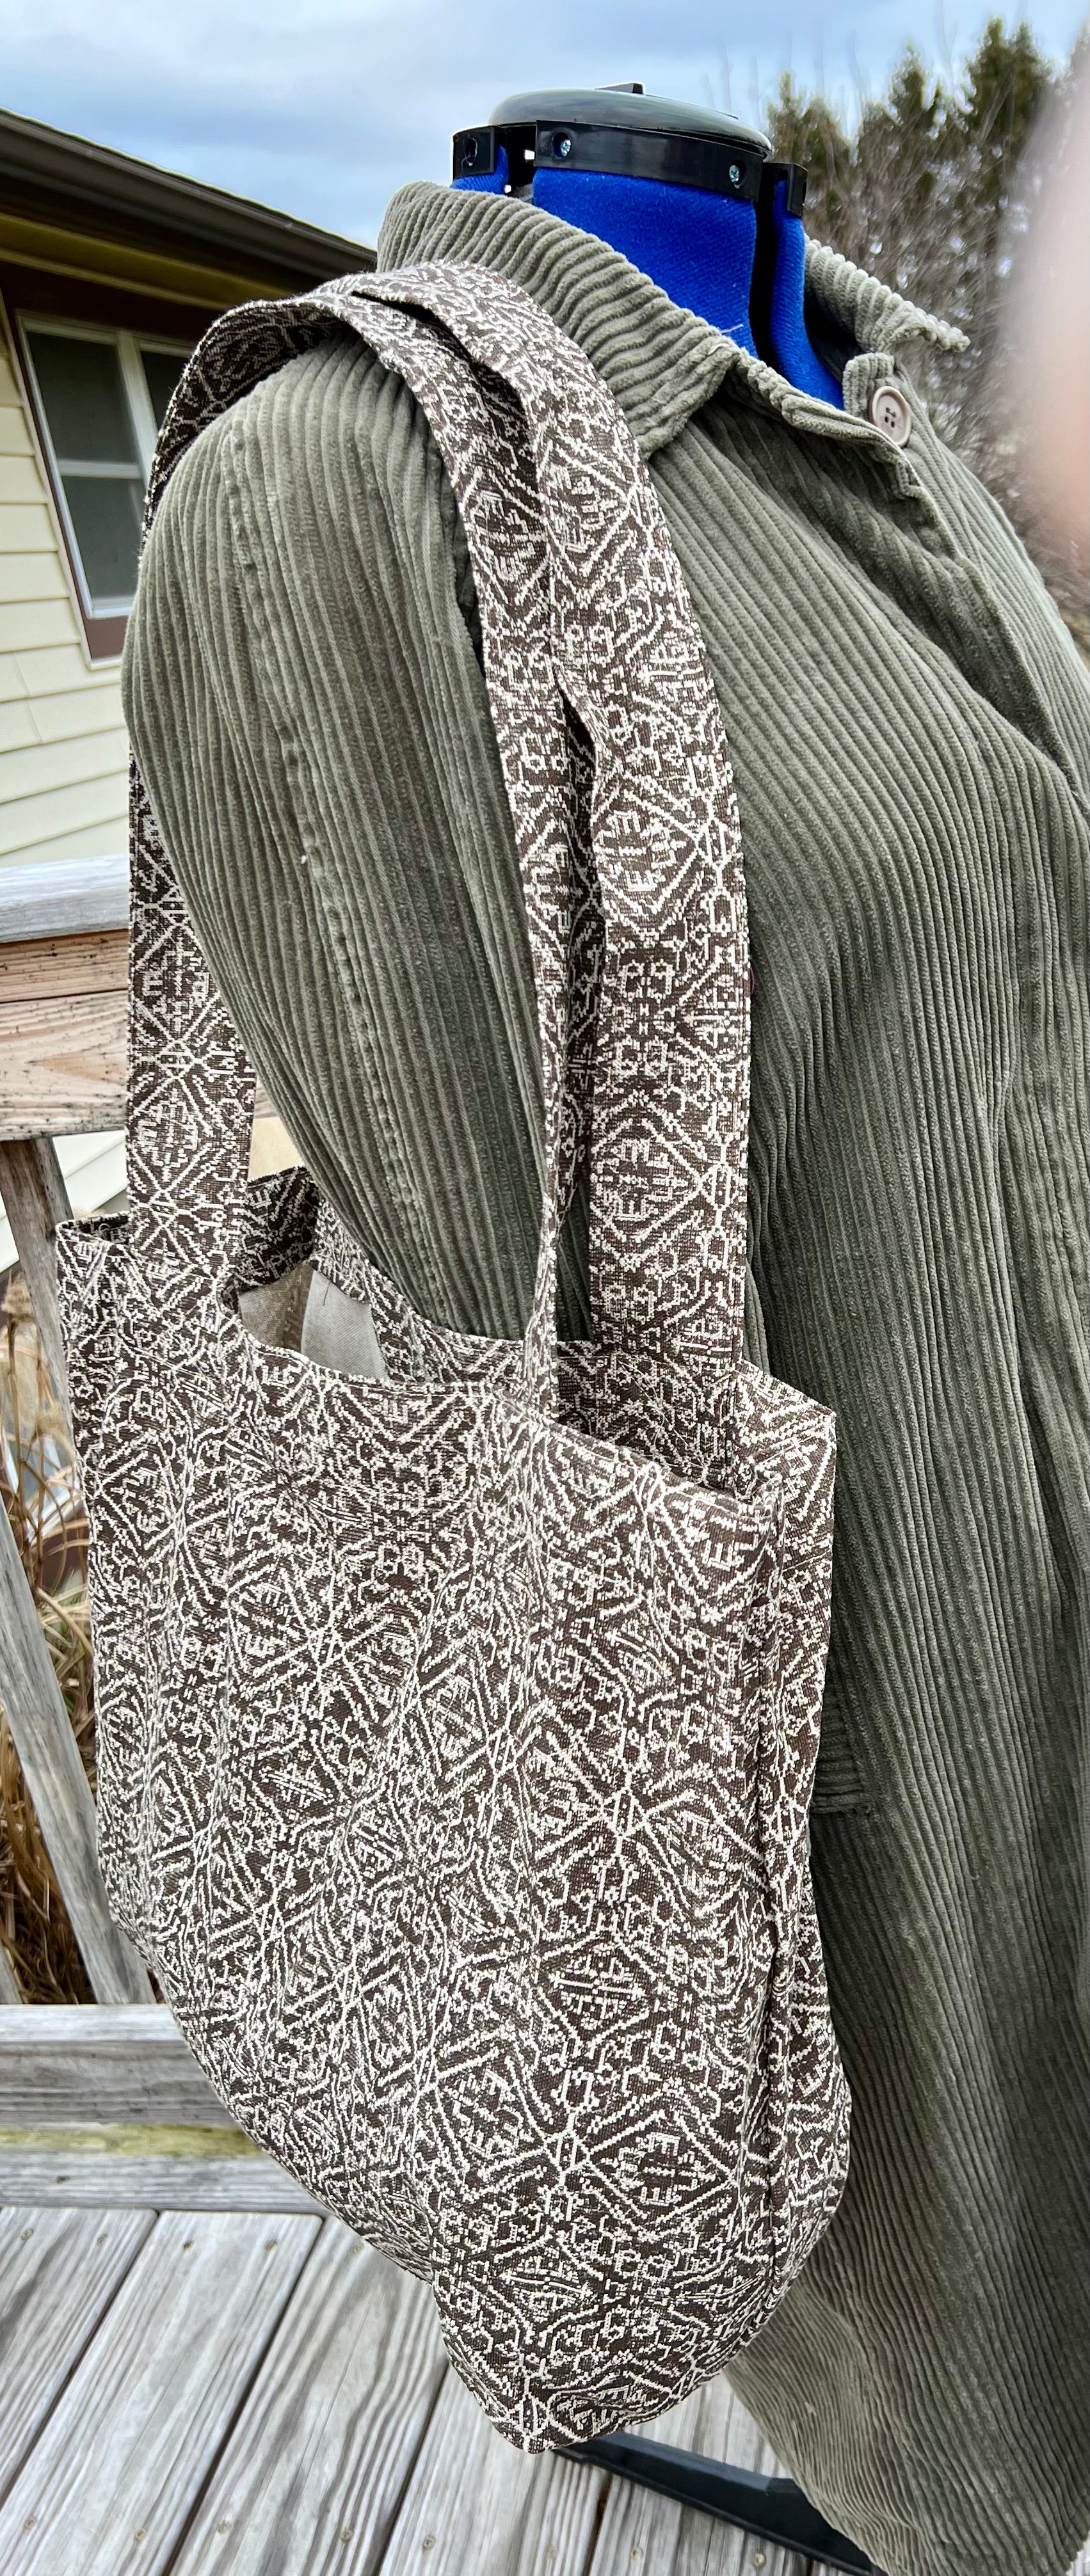 Market Grocery Tote Bag Beige and Brown